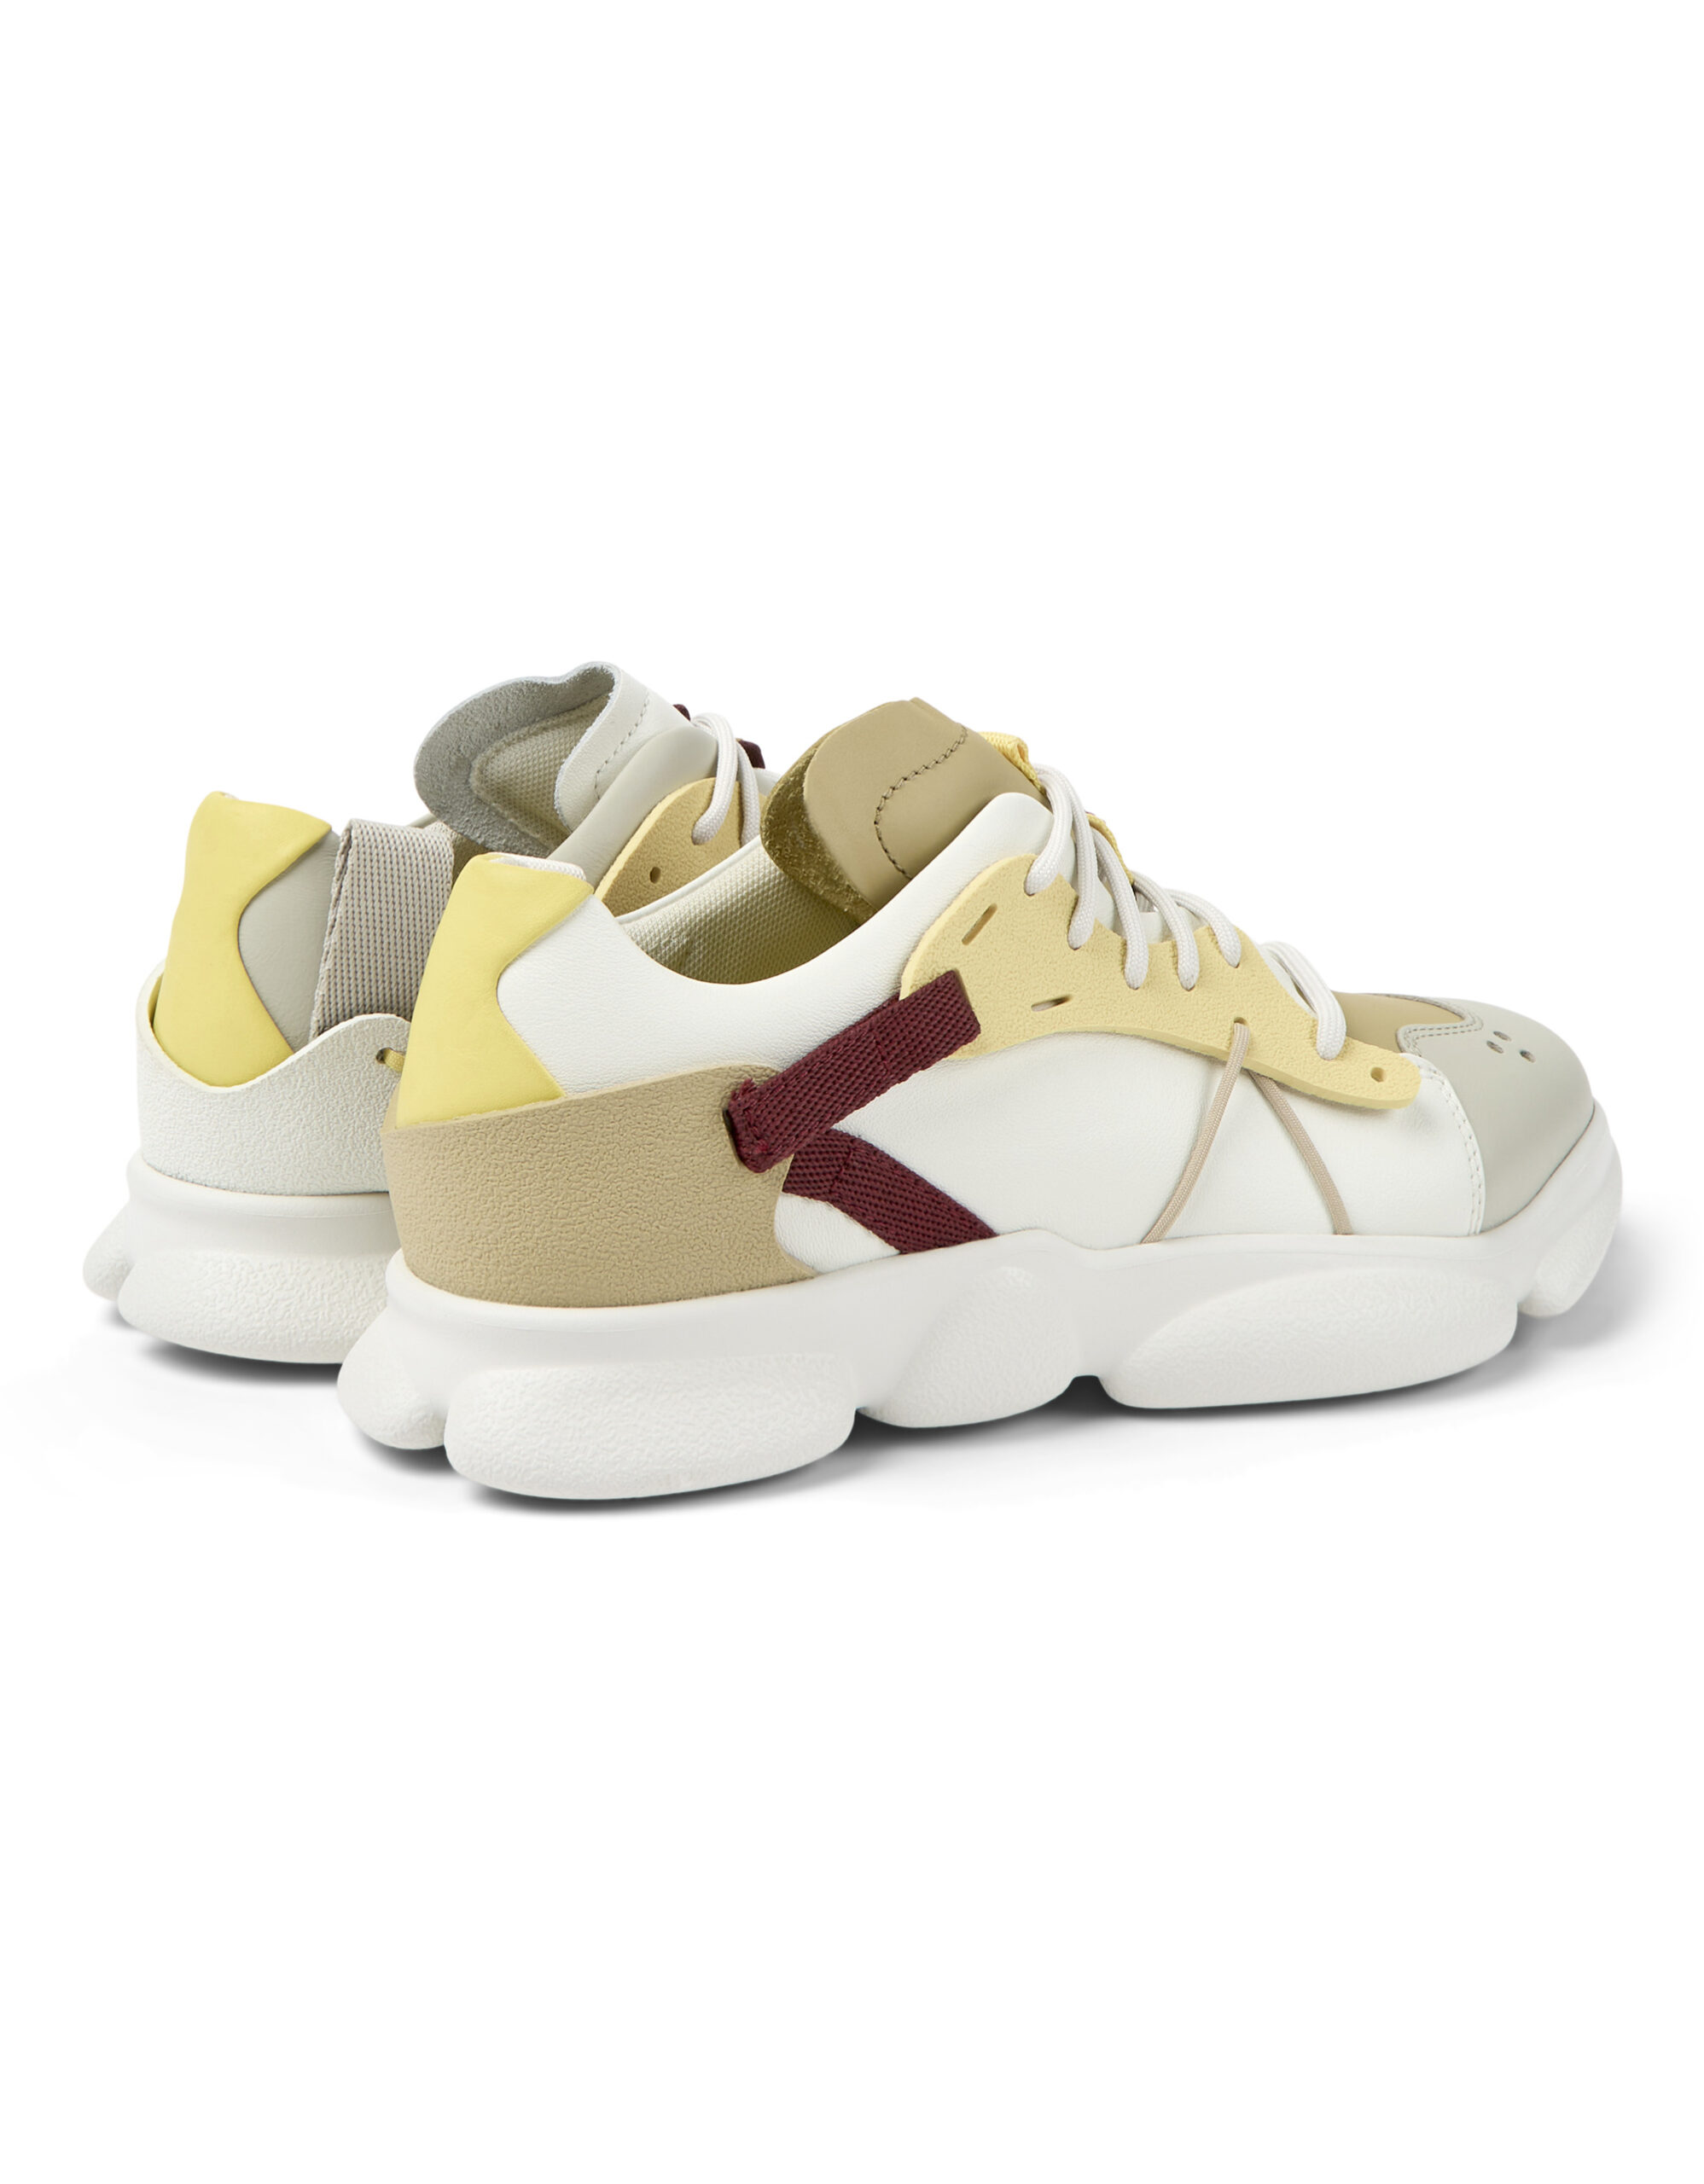 Karst Multicolor Sneakers for Women - Autumn/Winter collection